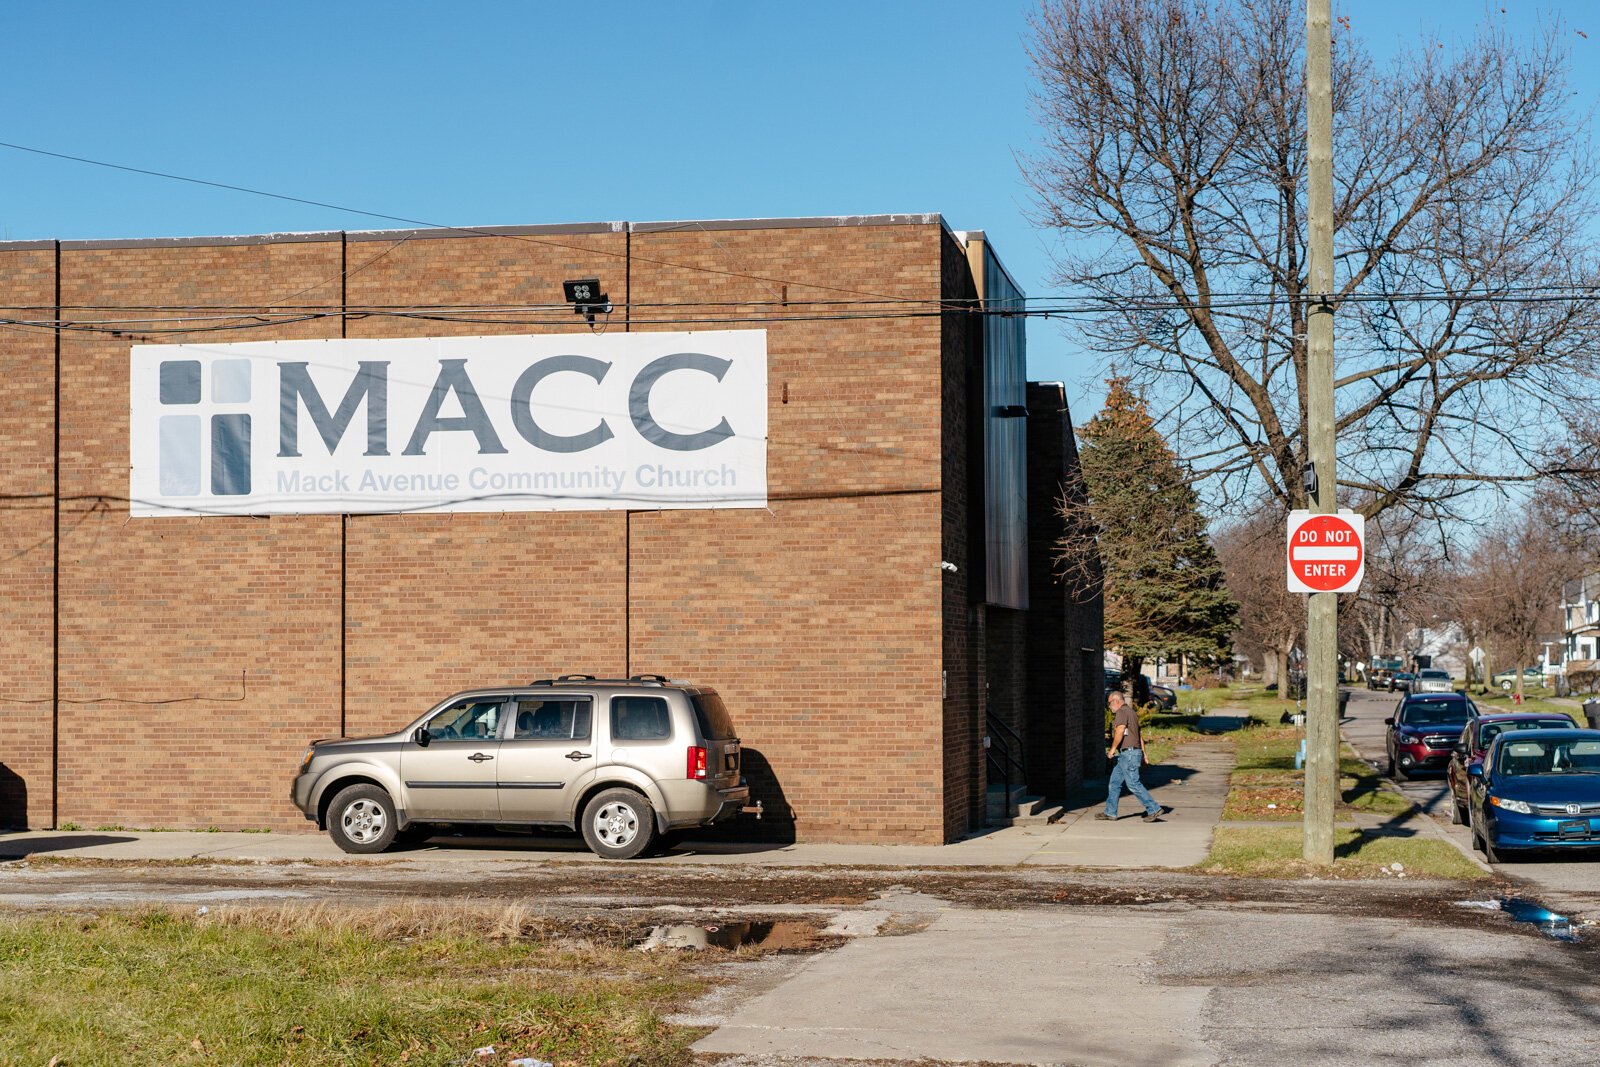 Mack Avenue Community Church is located on Detroit's East Side.